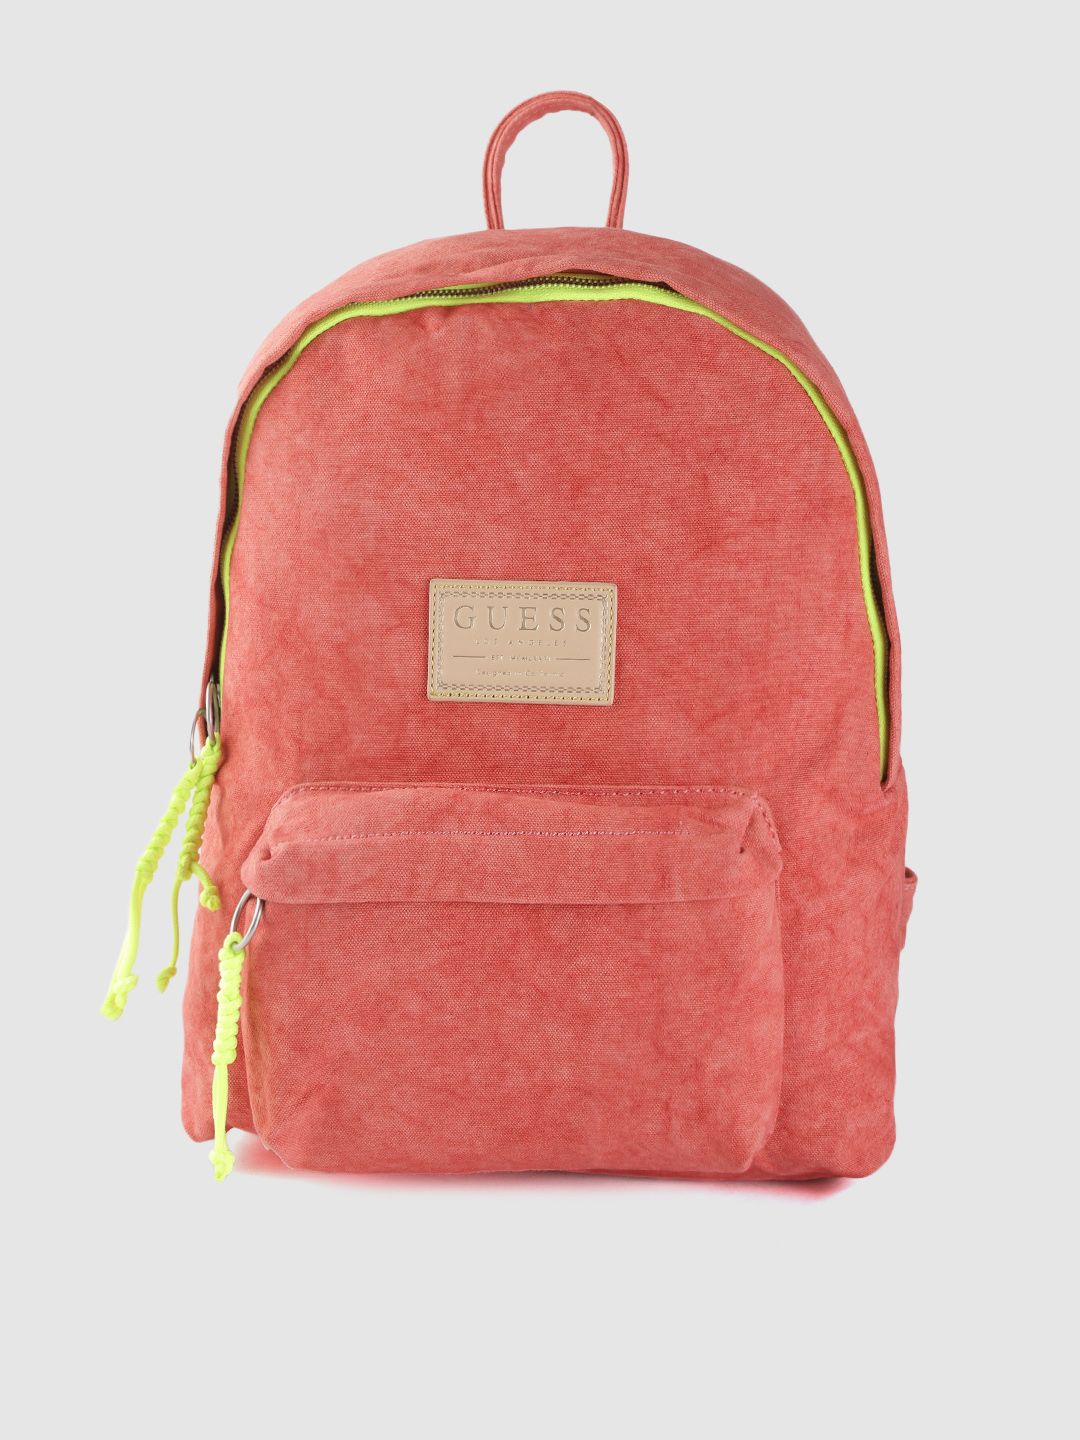 GUESS Women Coral Orange Solid Backpack Price in India